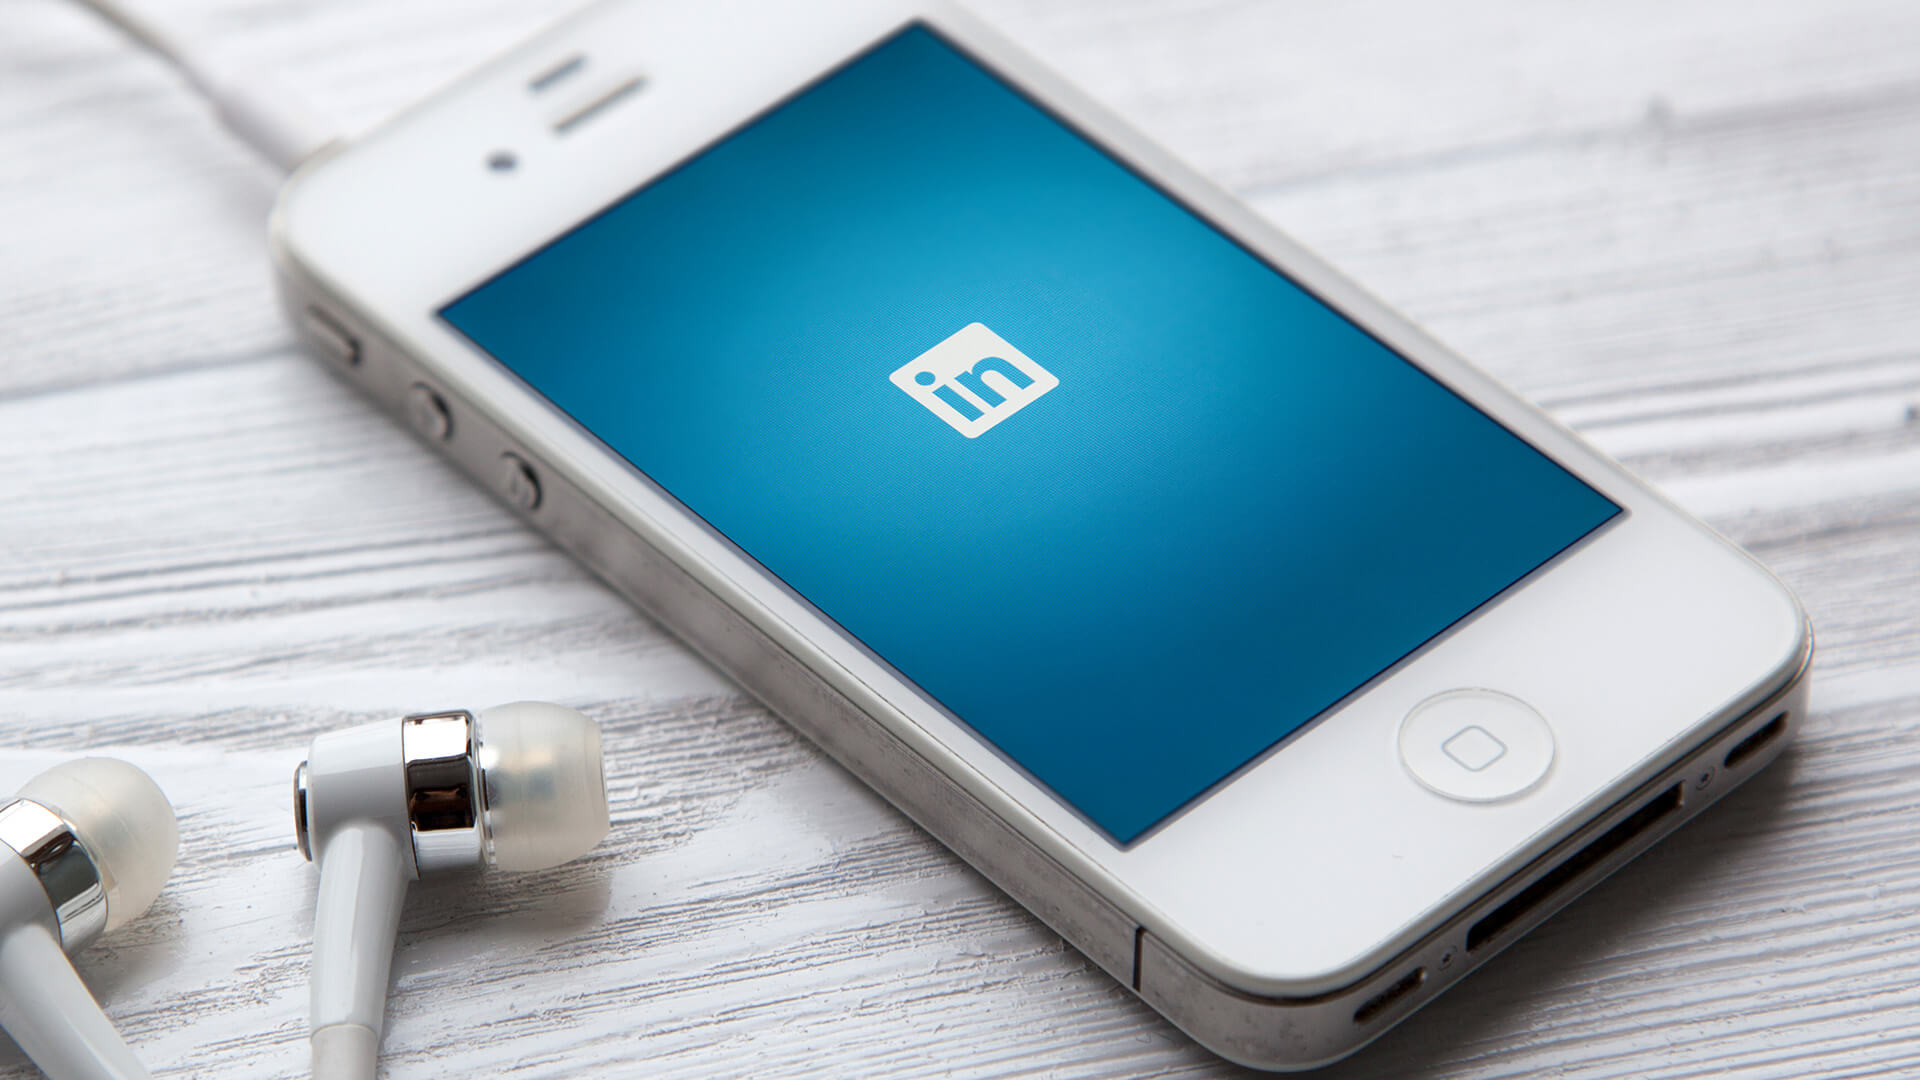 LinkedIn launches podcast network aimed at professional audiences